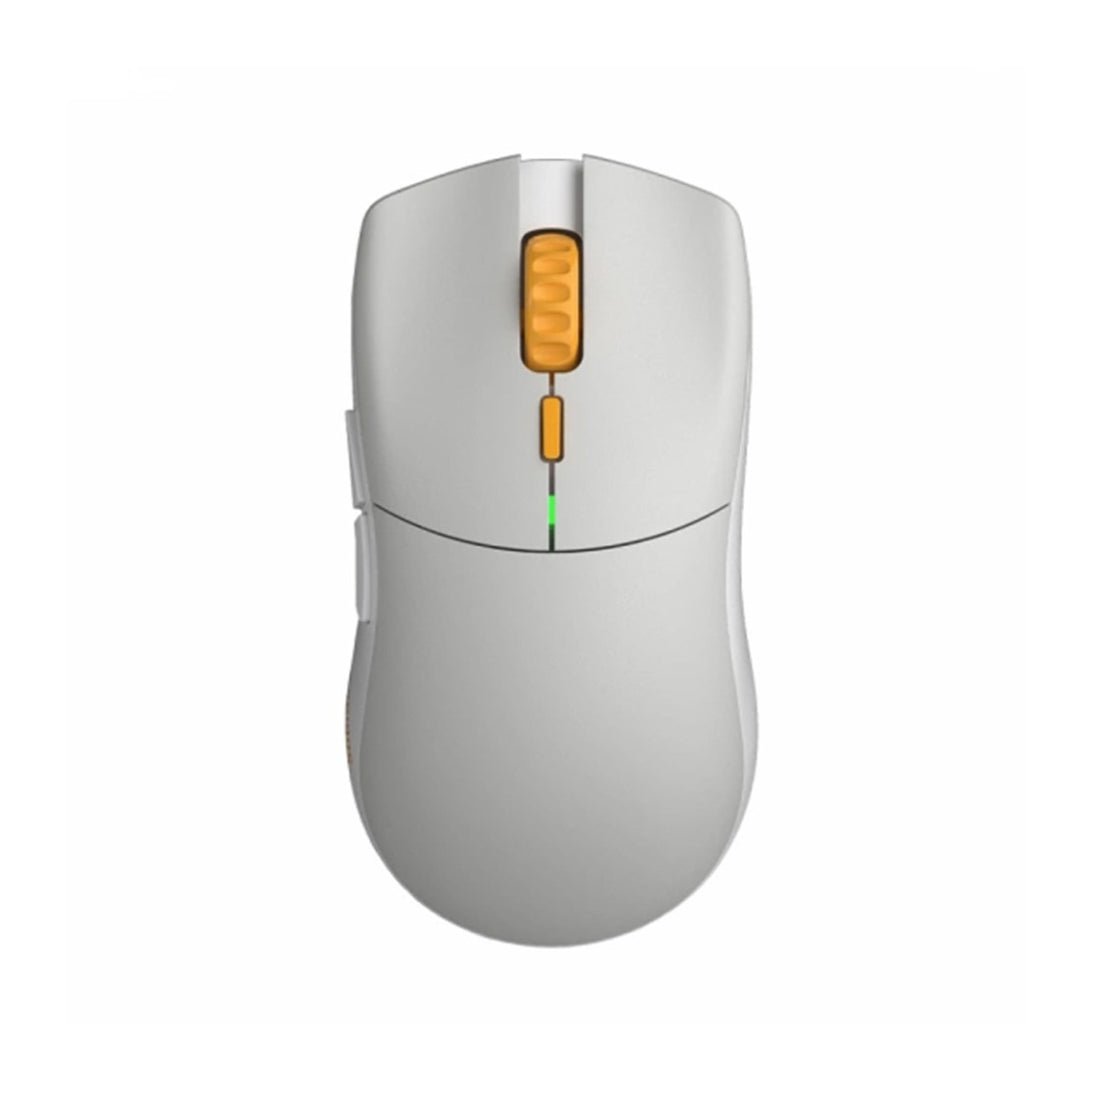 Glorious Series One PRO Wireless Mouse - Grey & Gold (Genos) - فأرة - Store 974 | ستور ٩٧٤